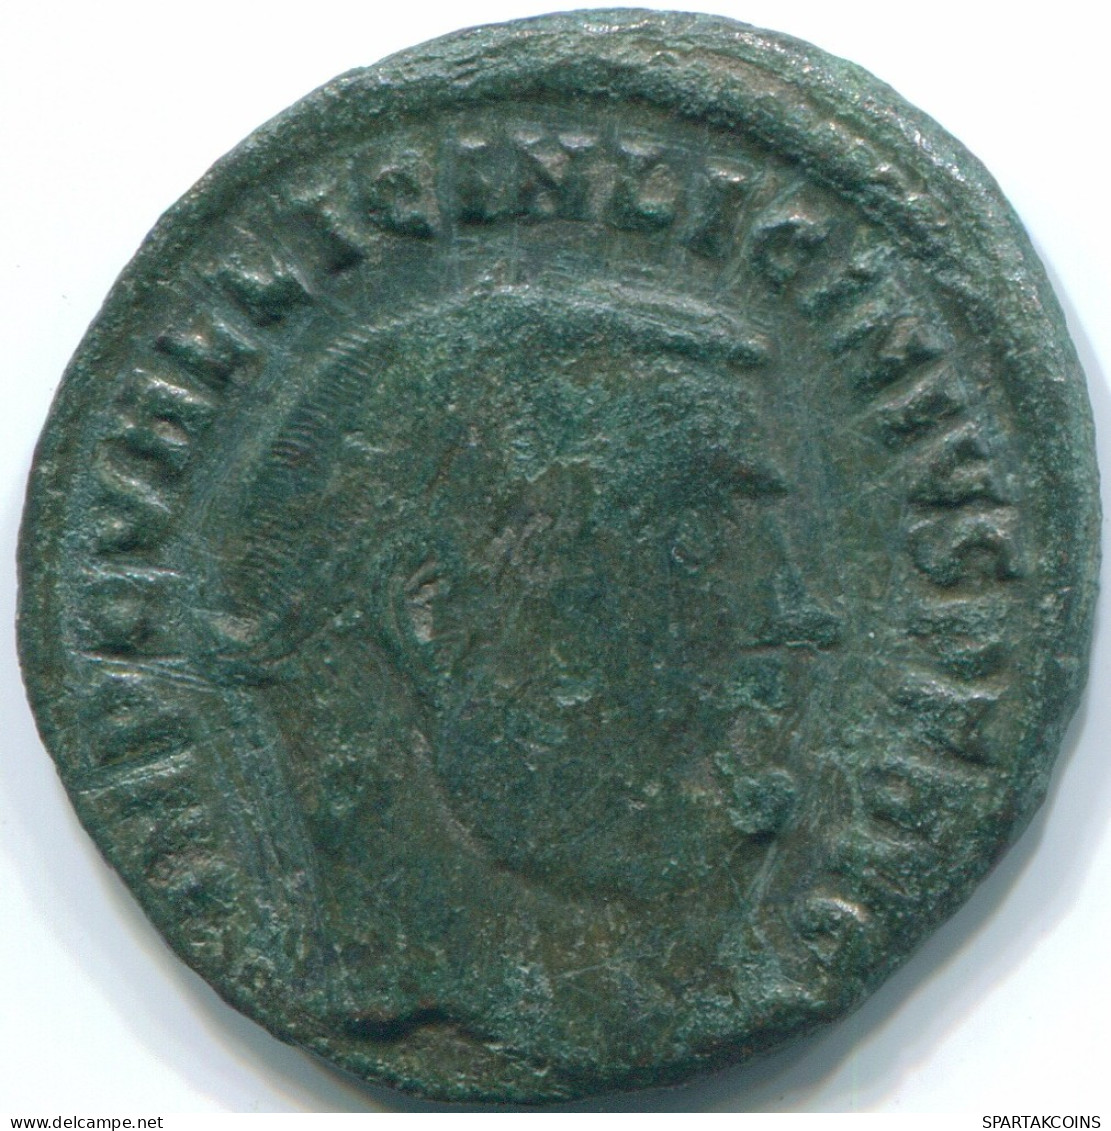 LICINIUS I Heraclea Mint AD 312 IOVICONS ERVATORI
 2.85g/21.66mm #ROM1007.8.D.A - The Christian Empire (307 AD To 363 AD)